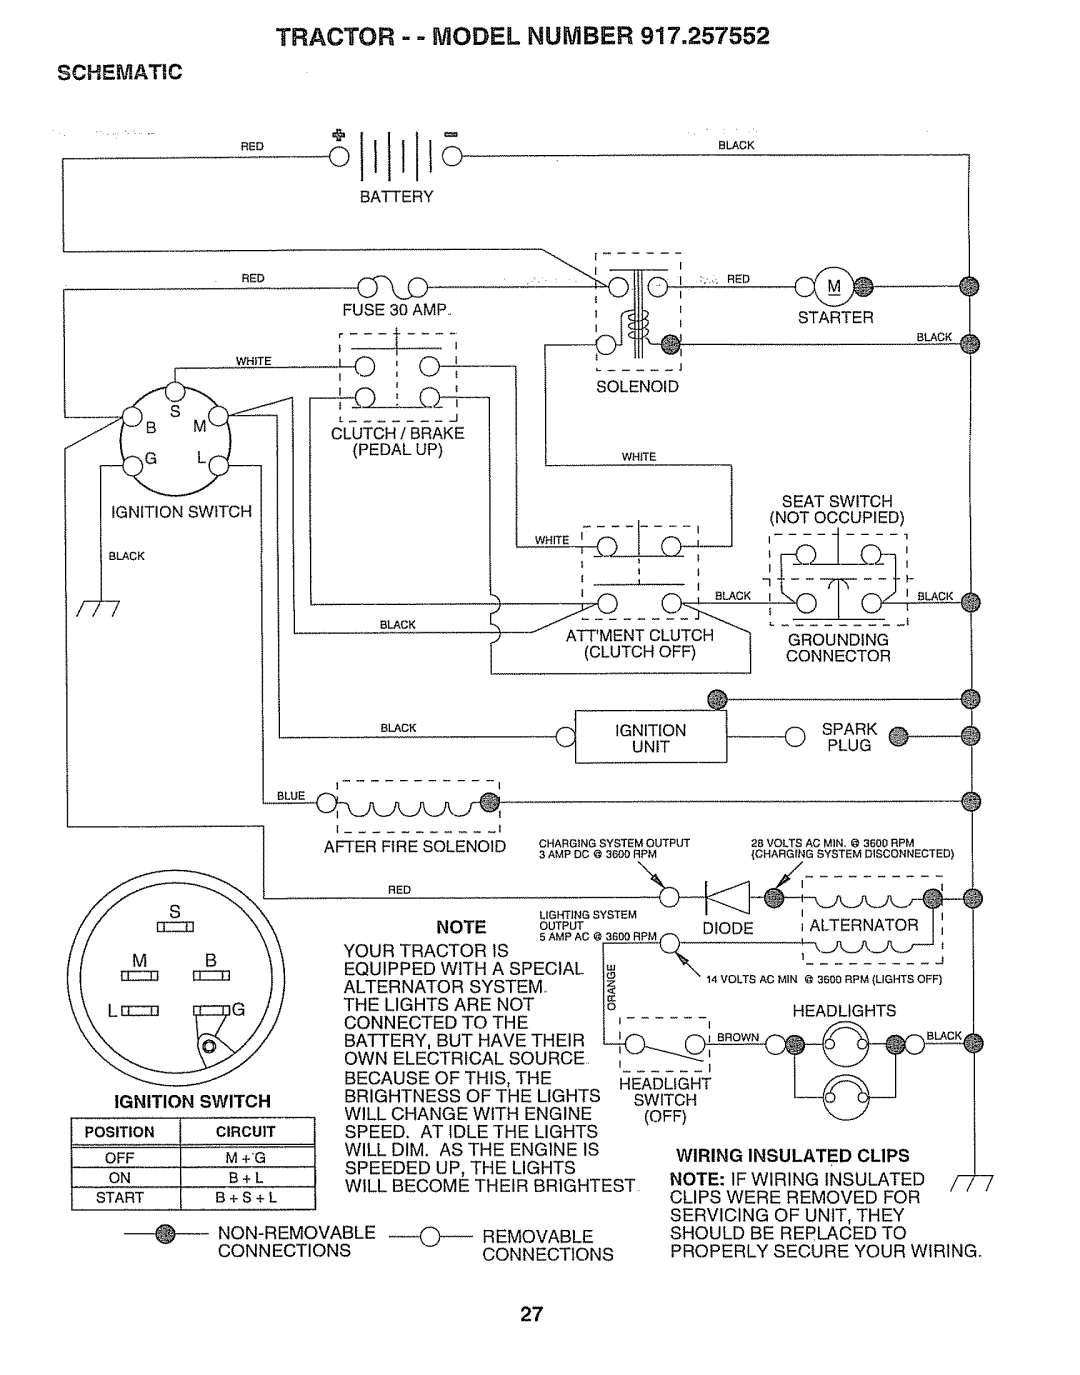 Sears 917.257552 B_cK, SPARK@-------4_, BATTERY,BUTHAVETHEIR,L40, TRACTOR - - MODEL NUMBER 917,257552, Schematic, Ignition 